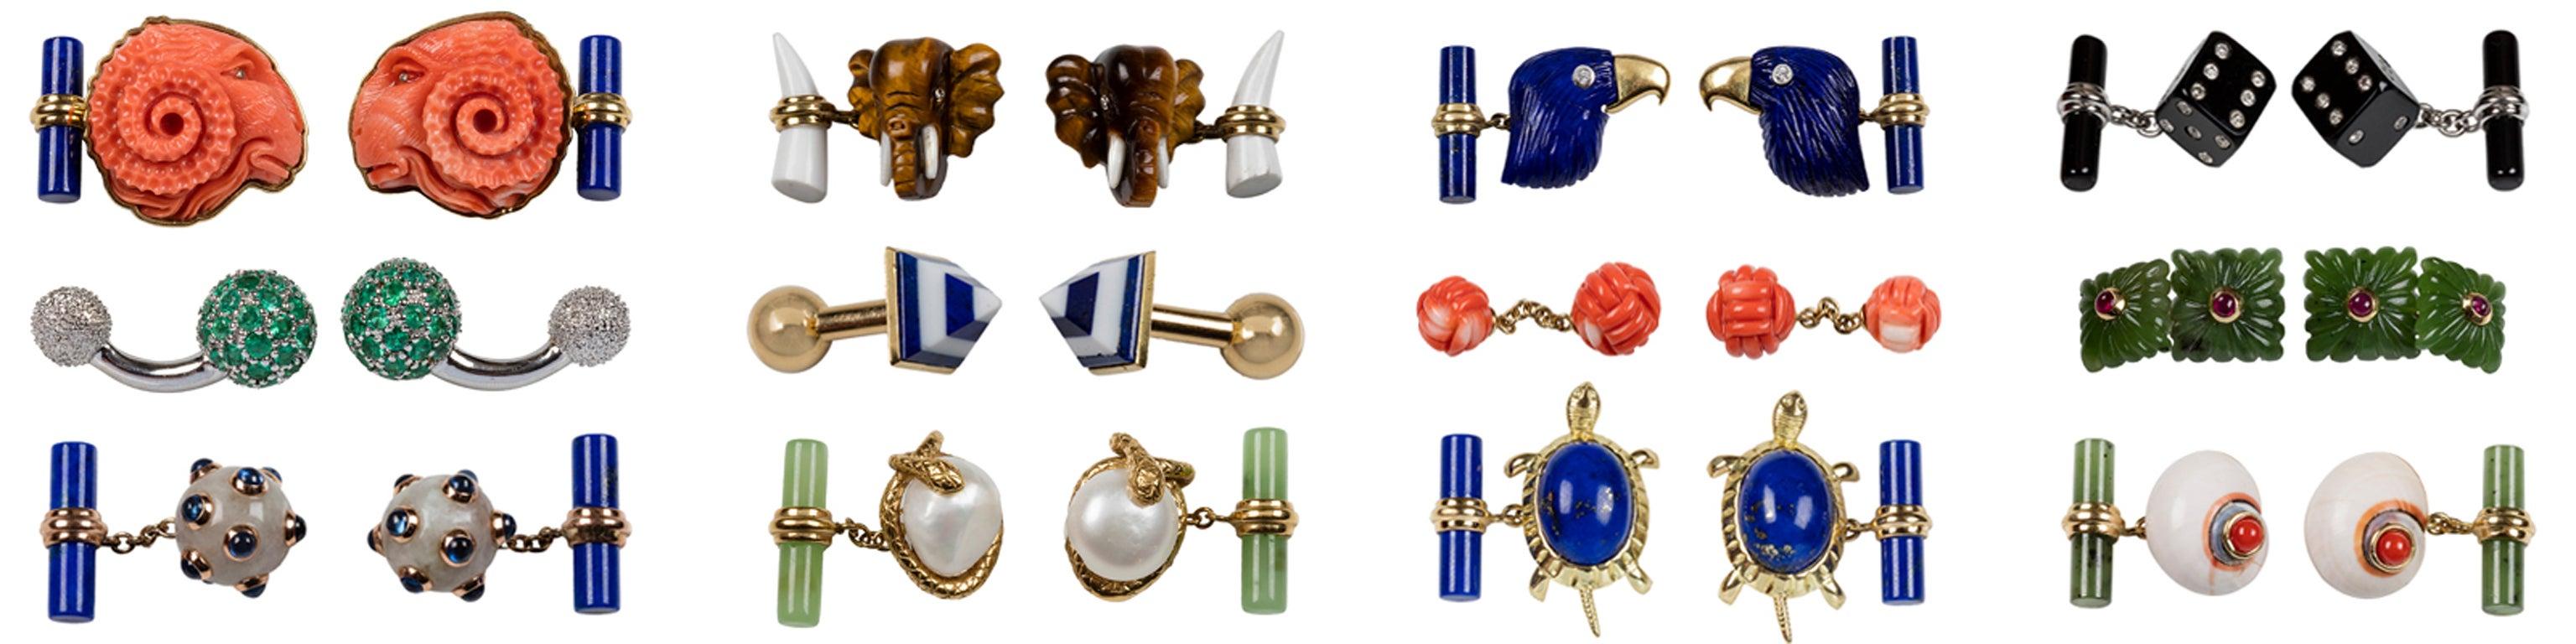 Cabochon Submarine Mine Cufflinks in Jade, Ruby and Lapis Lazuli For Sale